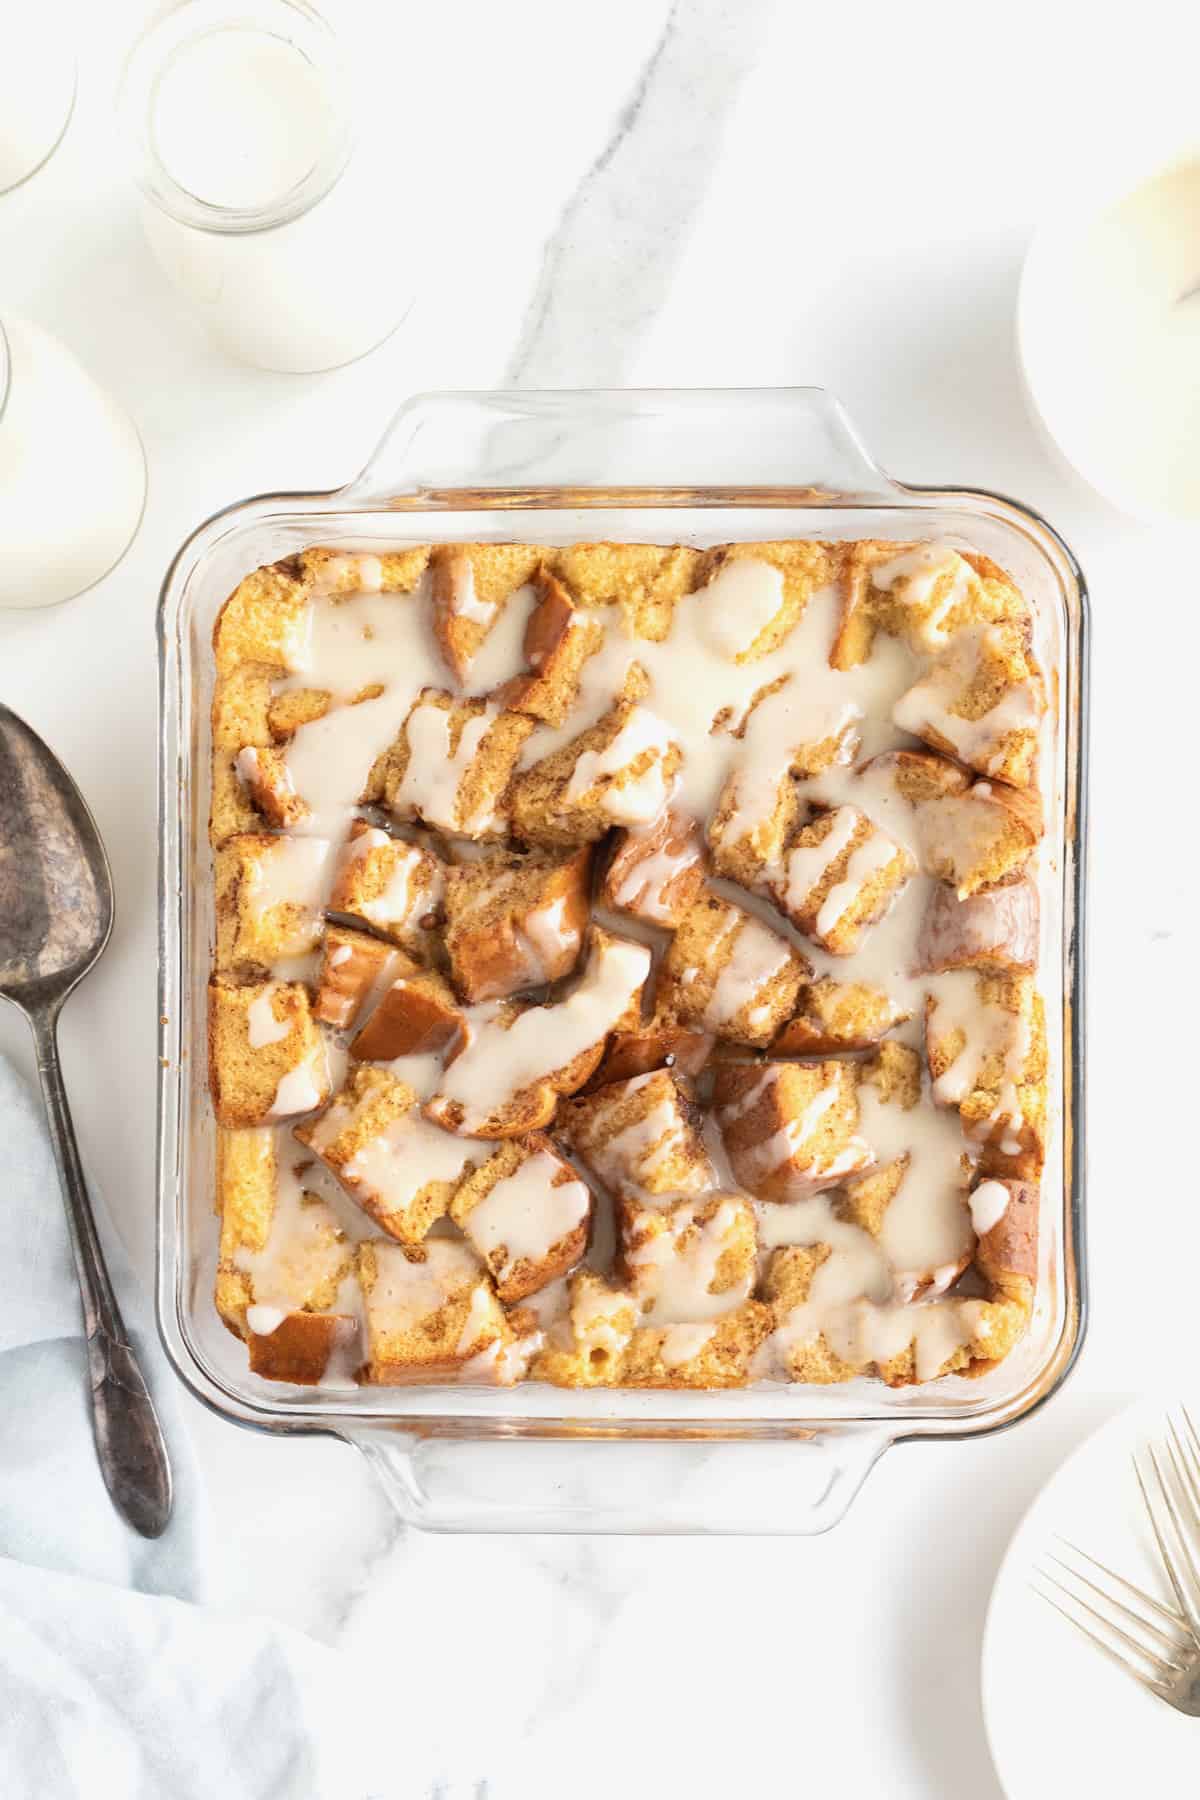 A square glass baking dish of bread pudding with white icing drizzled on top.